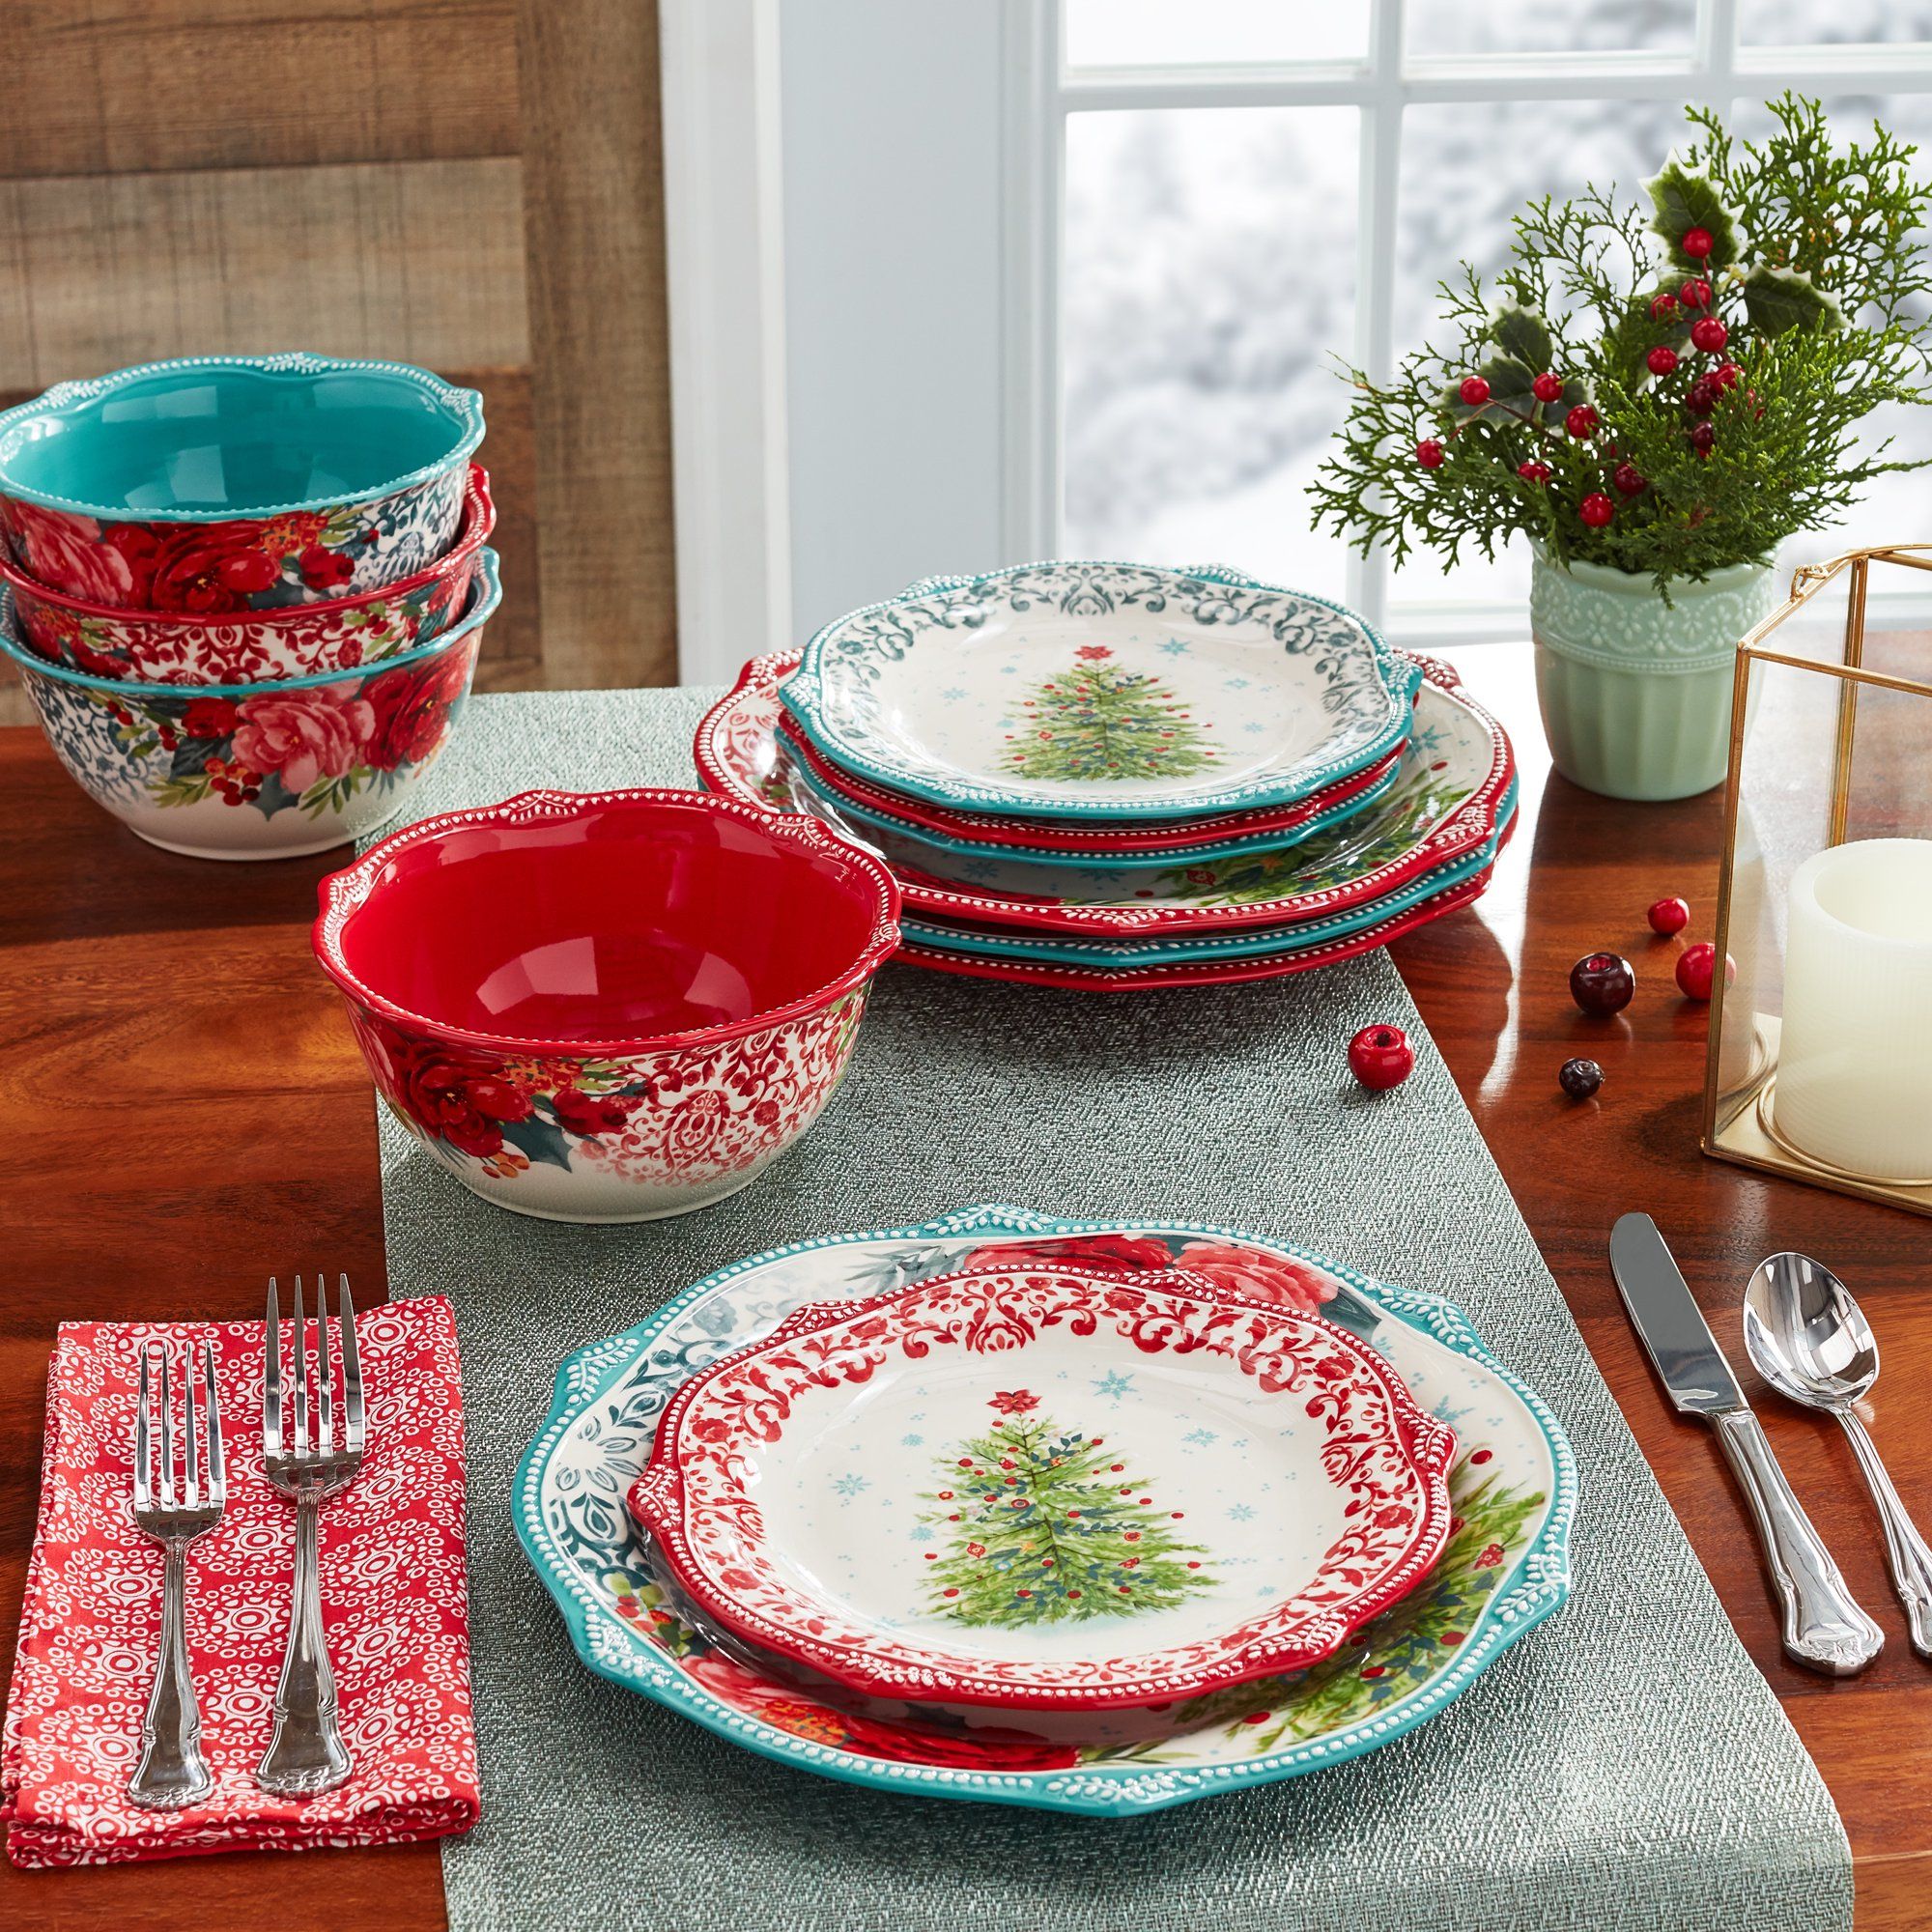 https://hips.hearstapps.com/hmg-prod/images/the-pioneer-woman-holiday-dinnerware-set-1639414662.jpeg